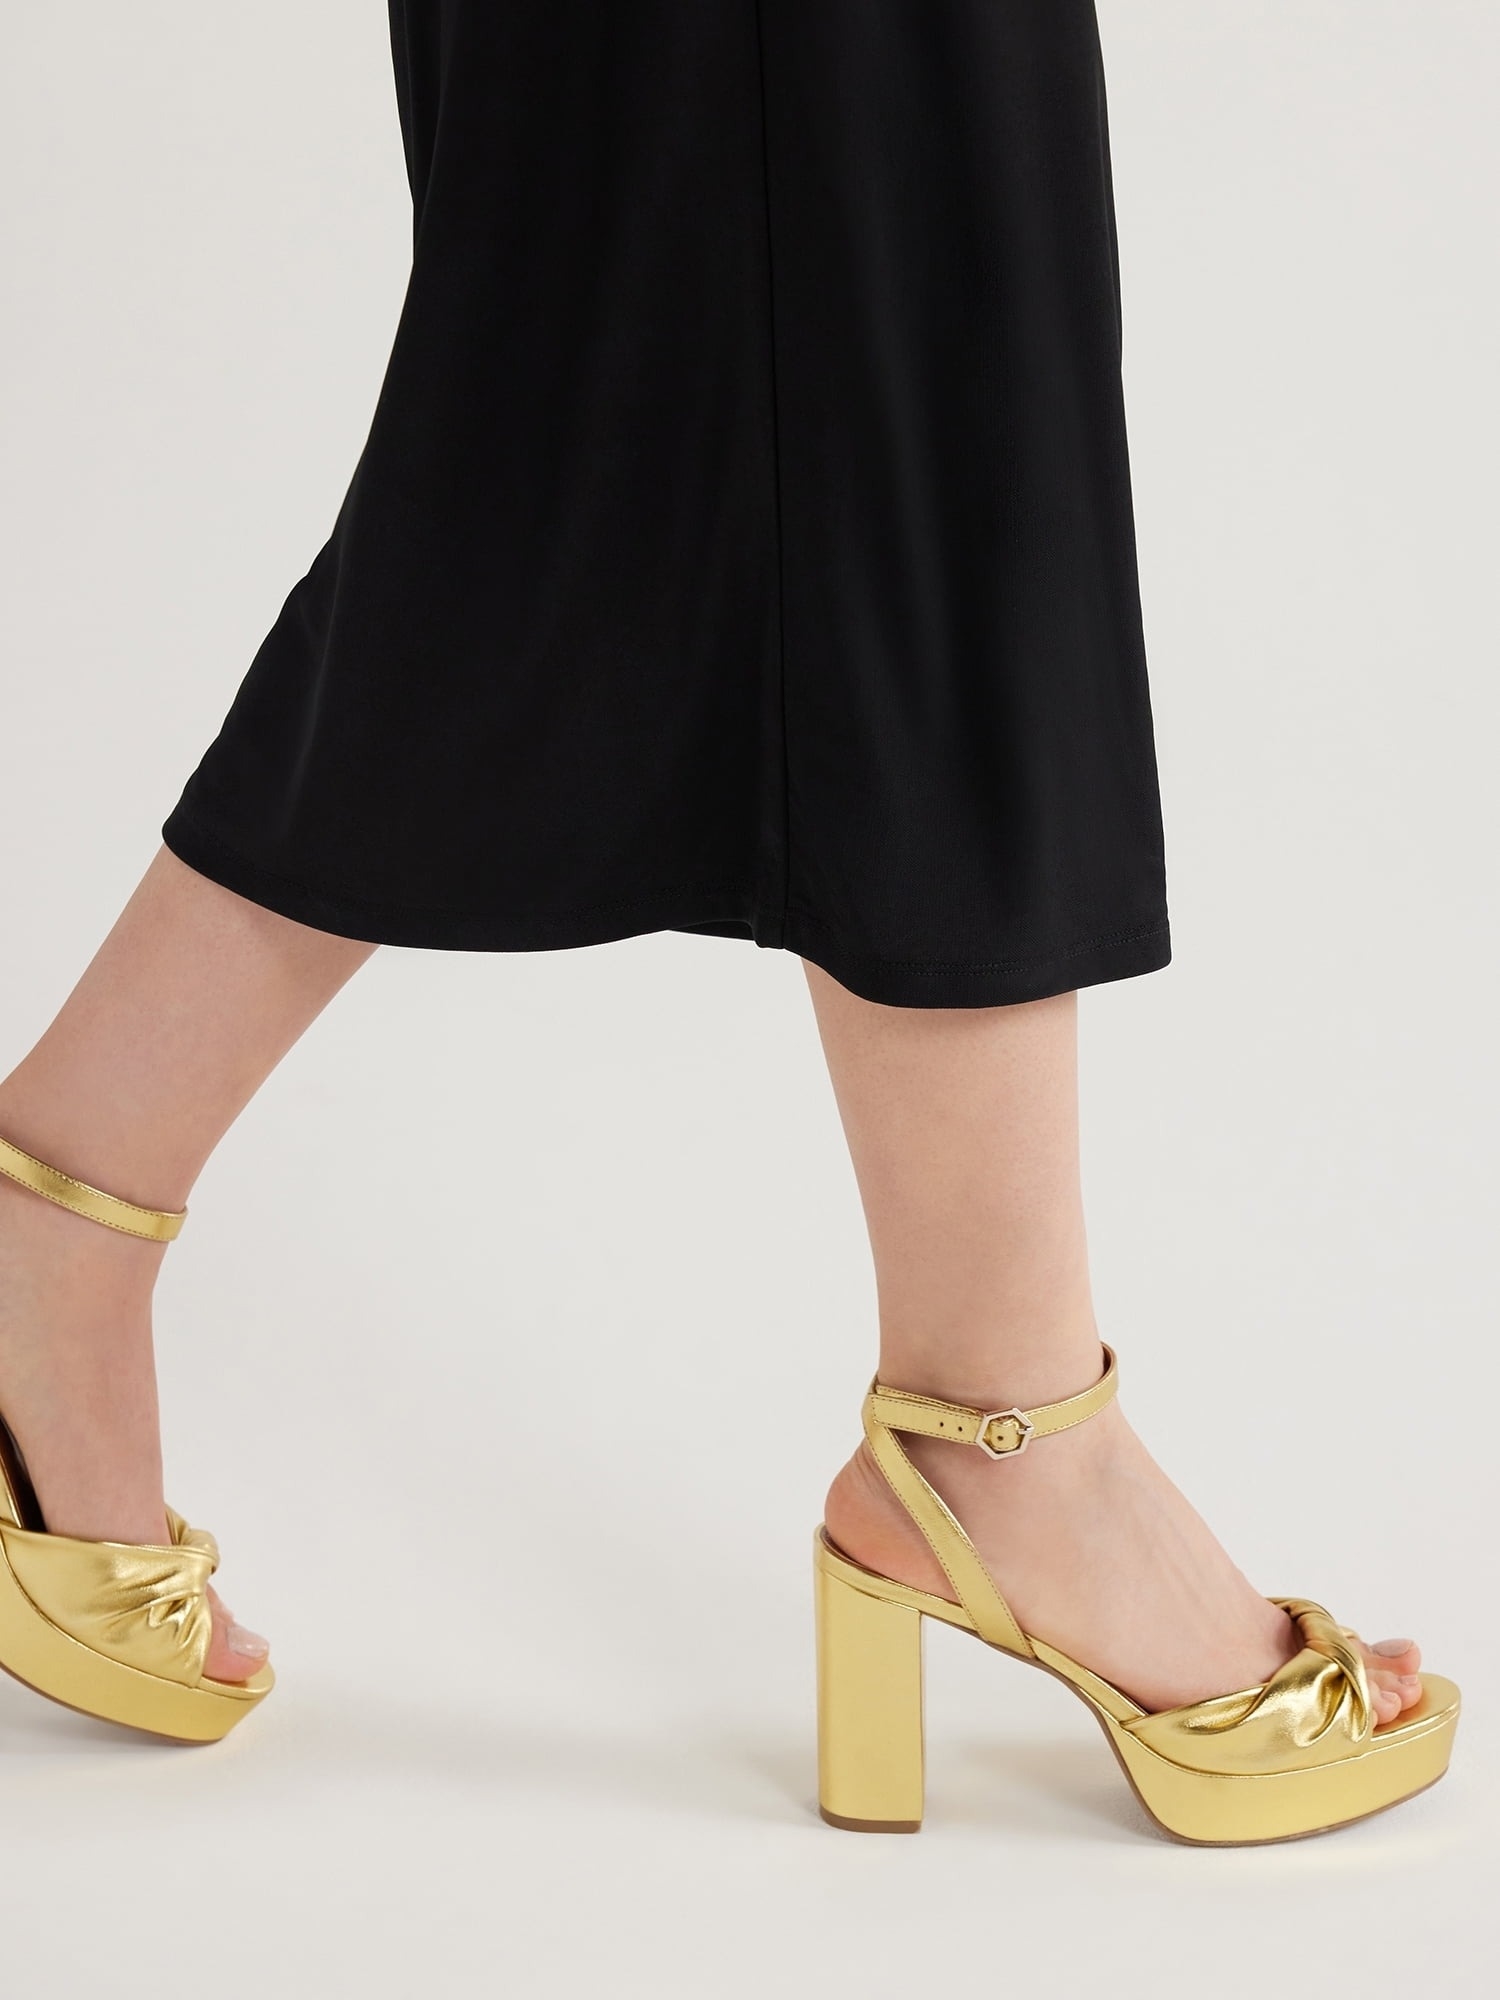 Close up of a model wearing gold high-heeled sandals with a bow detail, paired with a black dress